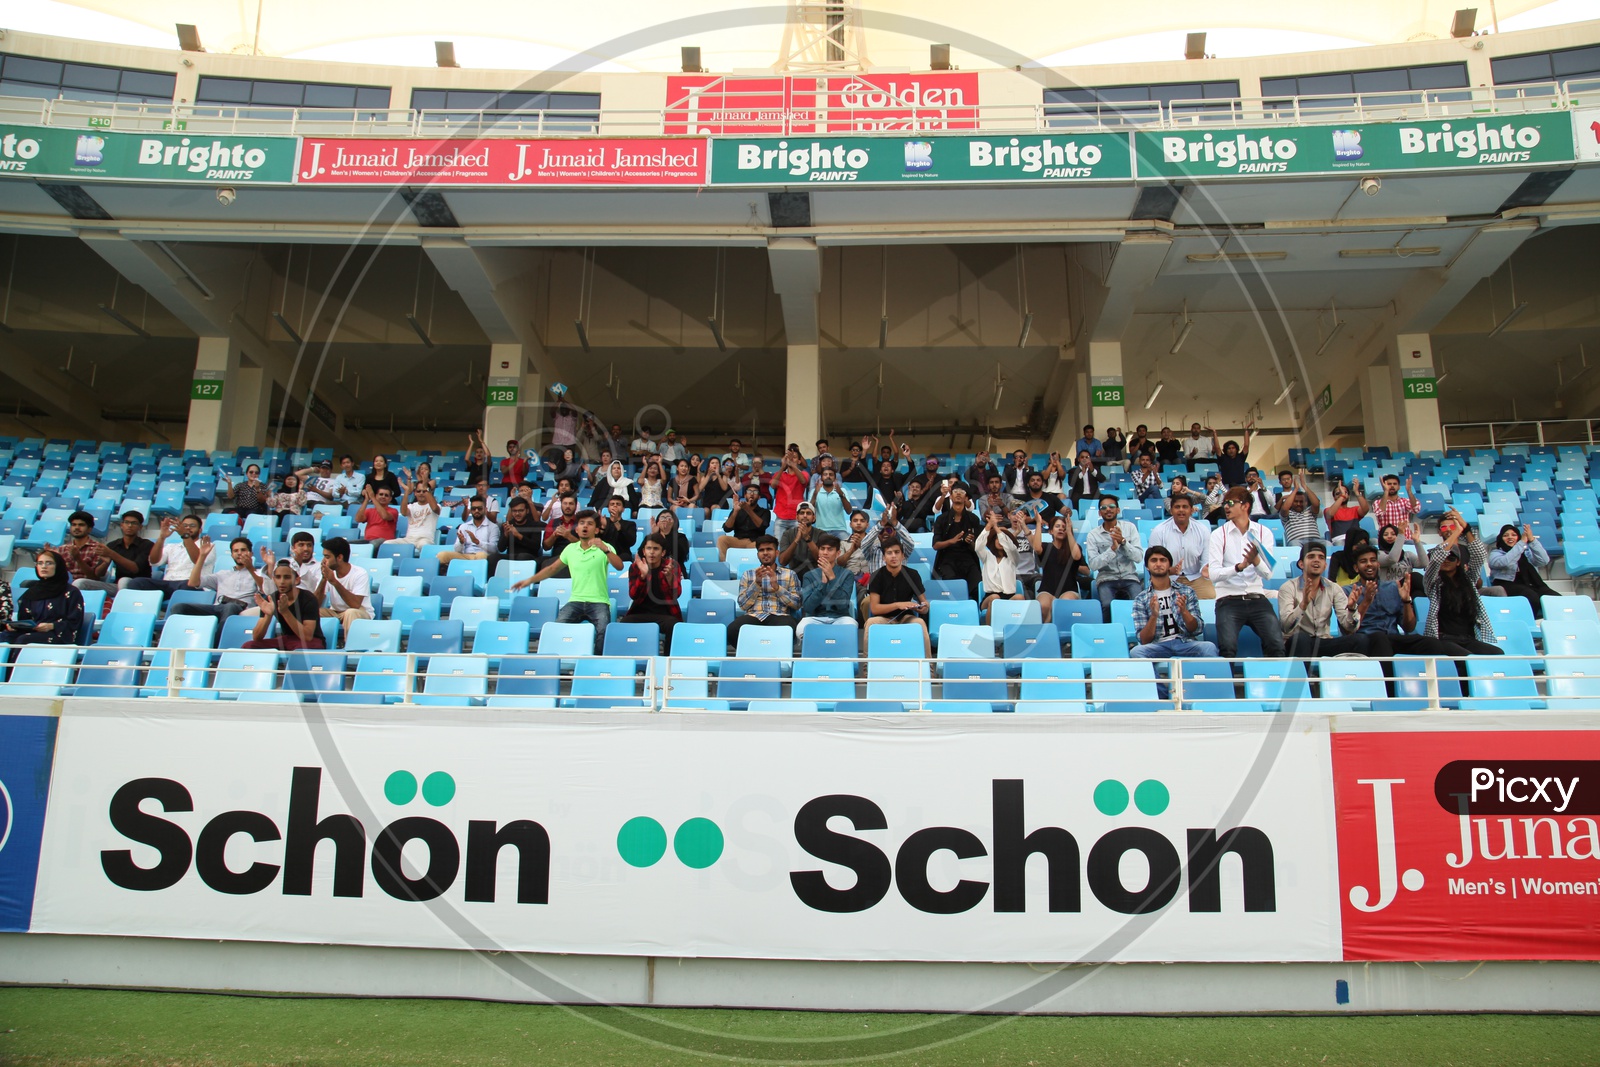 Crowd Cheering from Stands In a Cricket Stadium